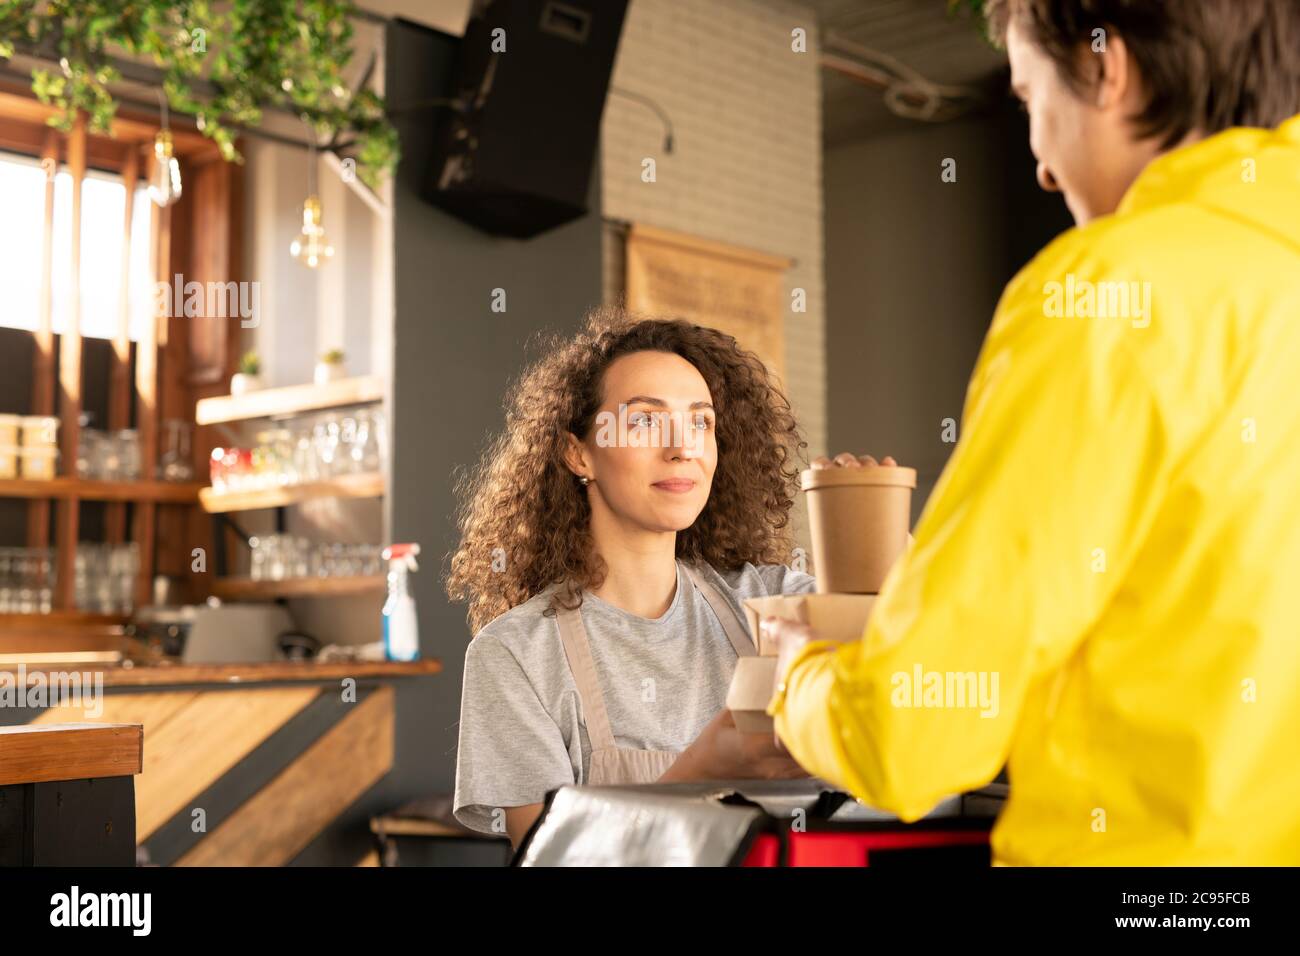 Content pretty waitress with curly hair giving packaged boxes to deliver boy for delivering to customer during coronavirus epidemic Stock Photo